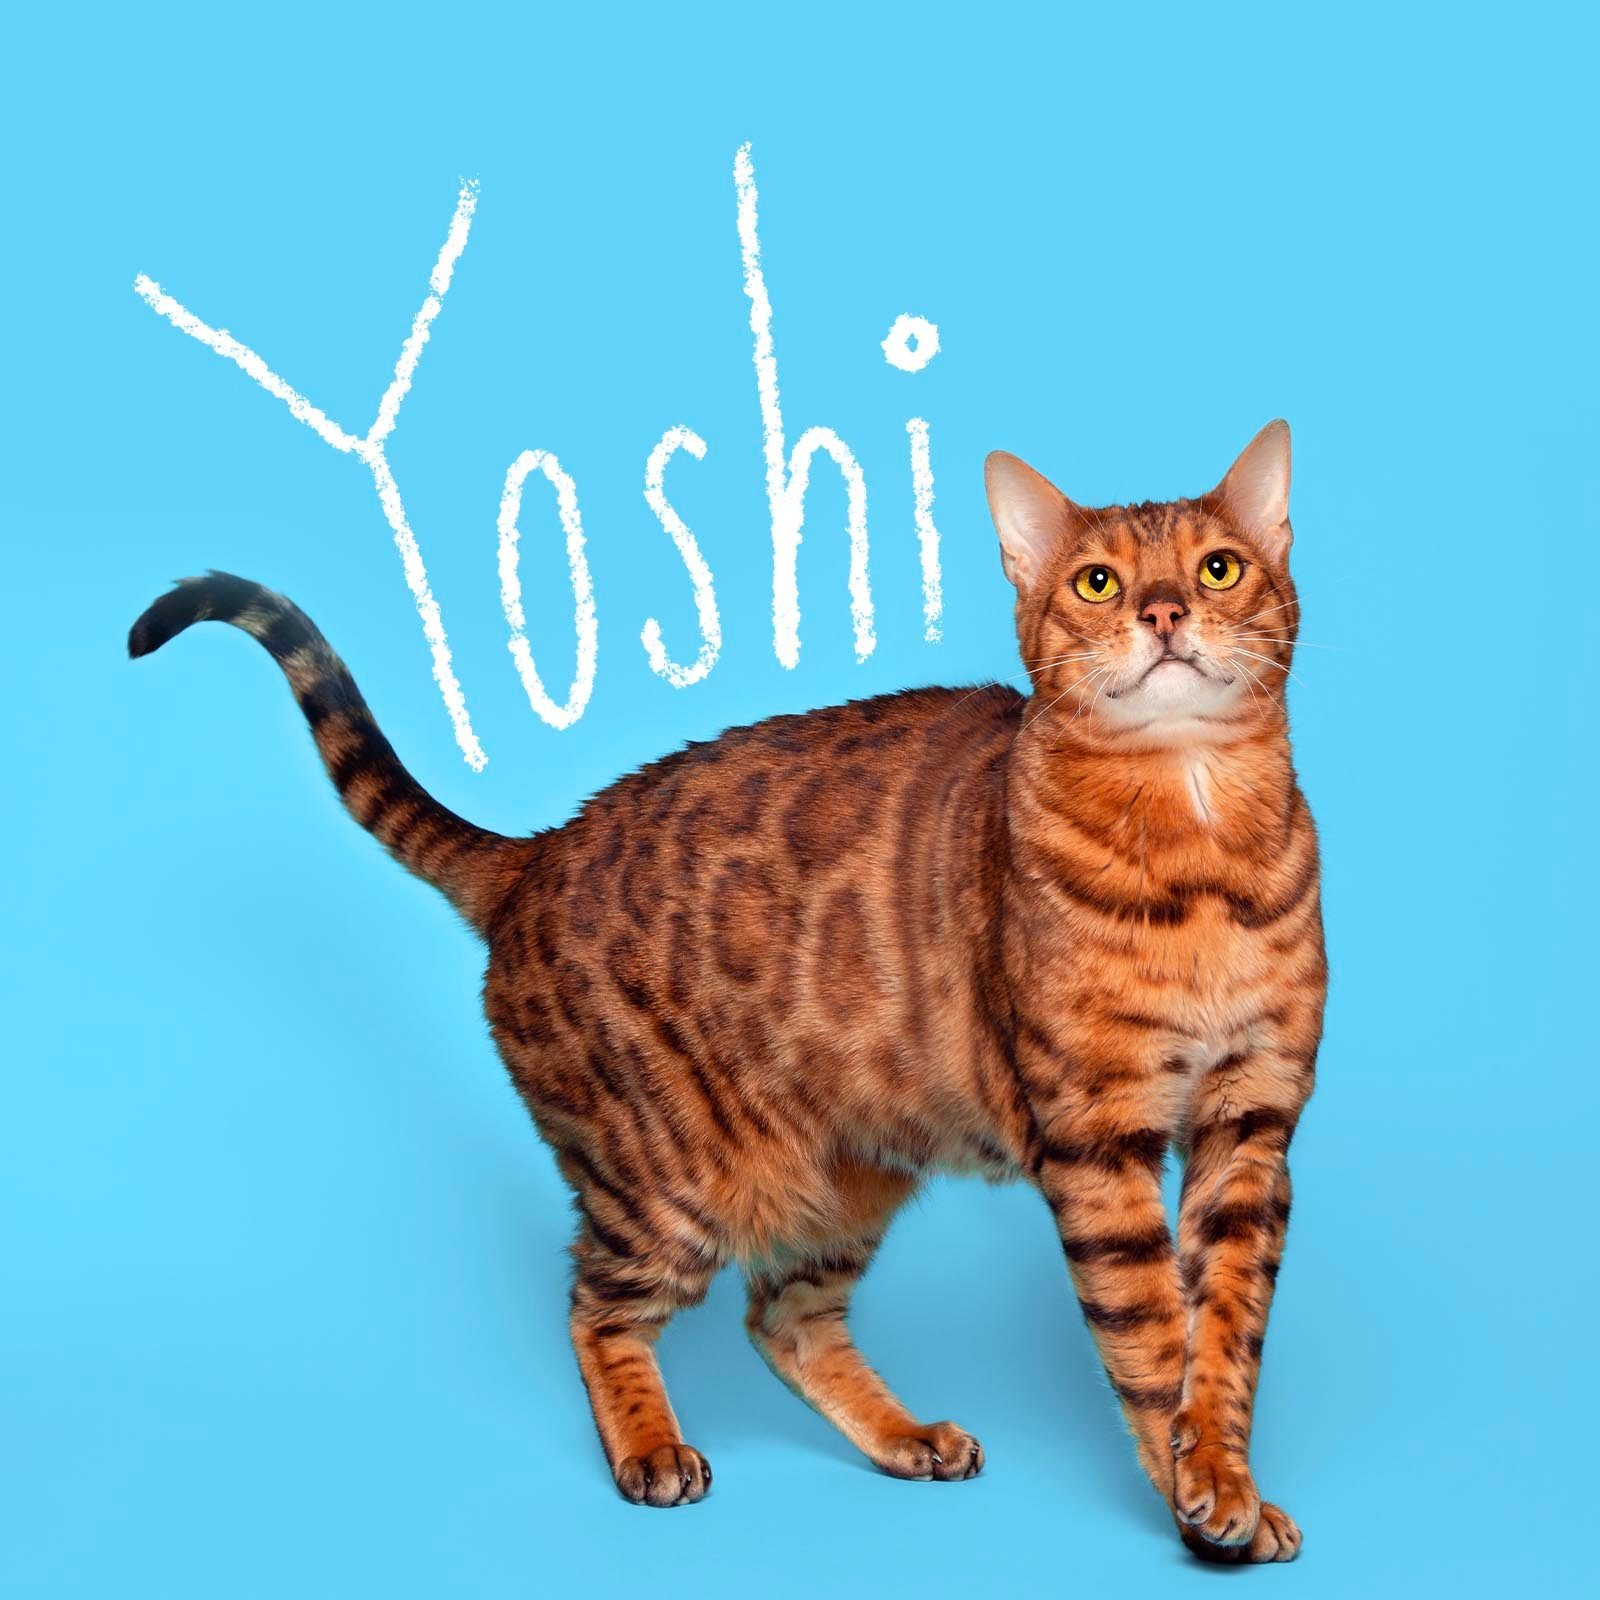 Boy cat name "Yoshi" handwritten on a photo of a cat on a blue background